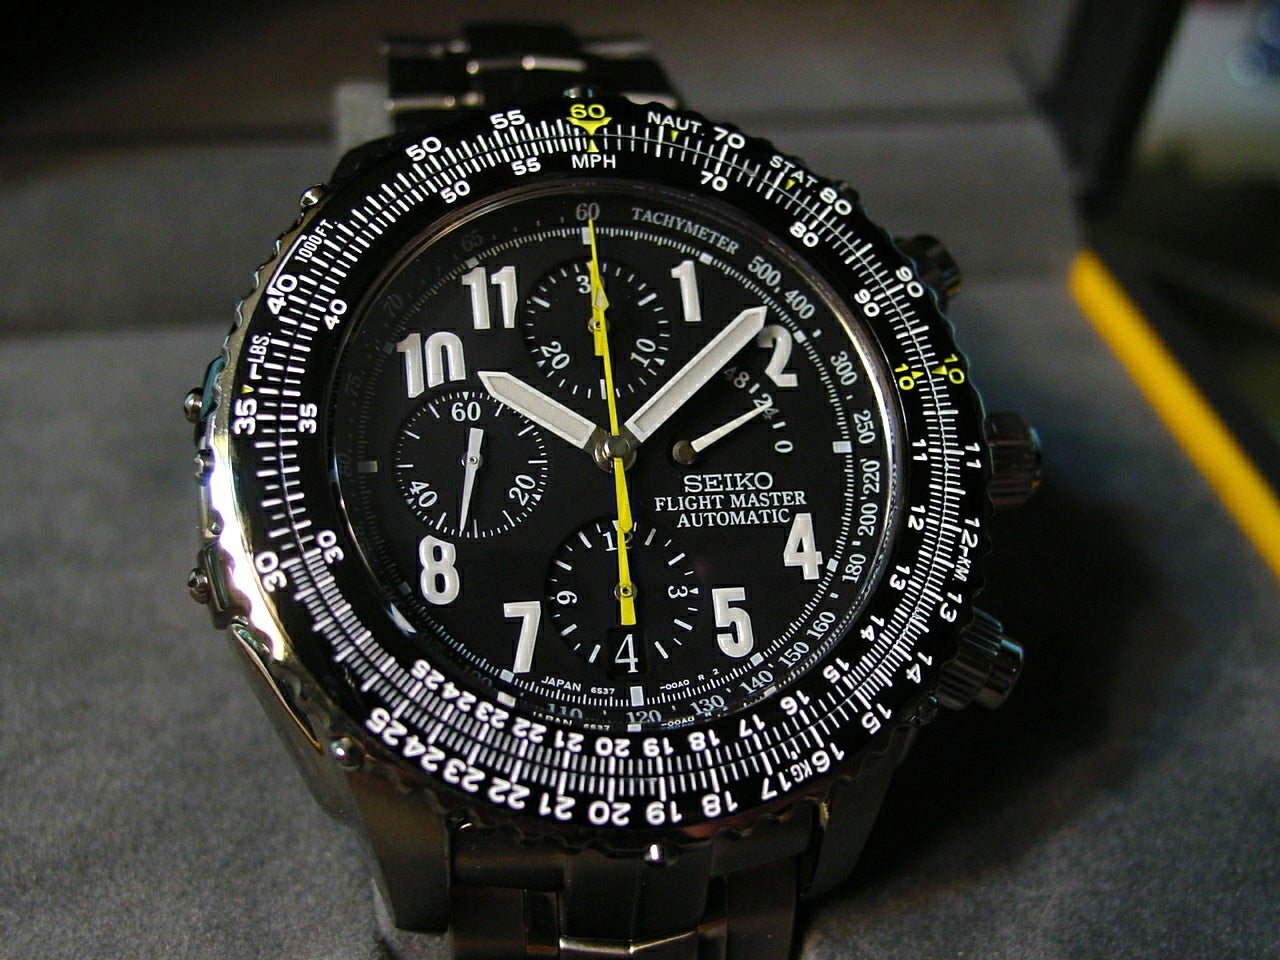 New arrival,Seiko SBDS003 Auto Flightmaster | The Watch Site